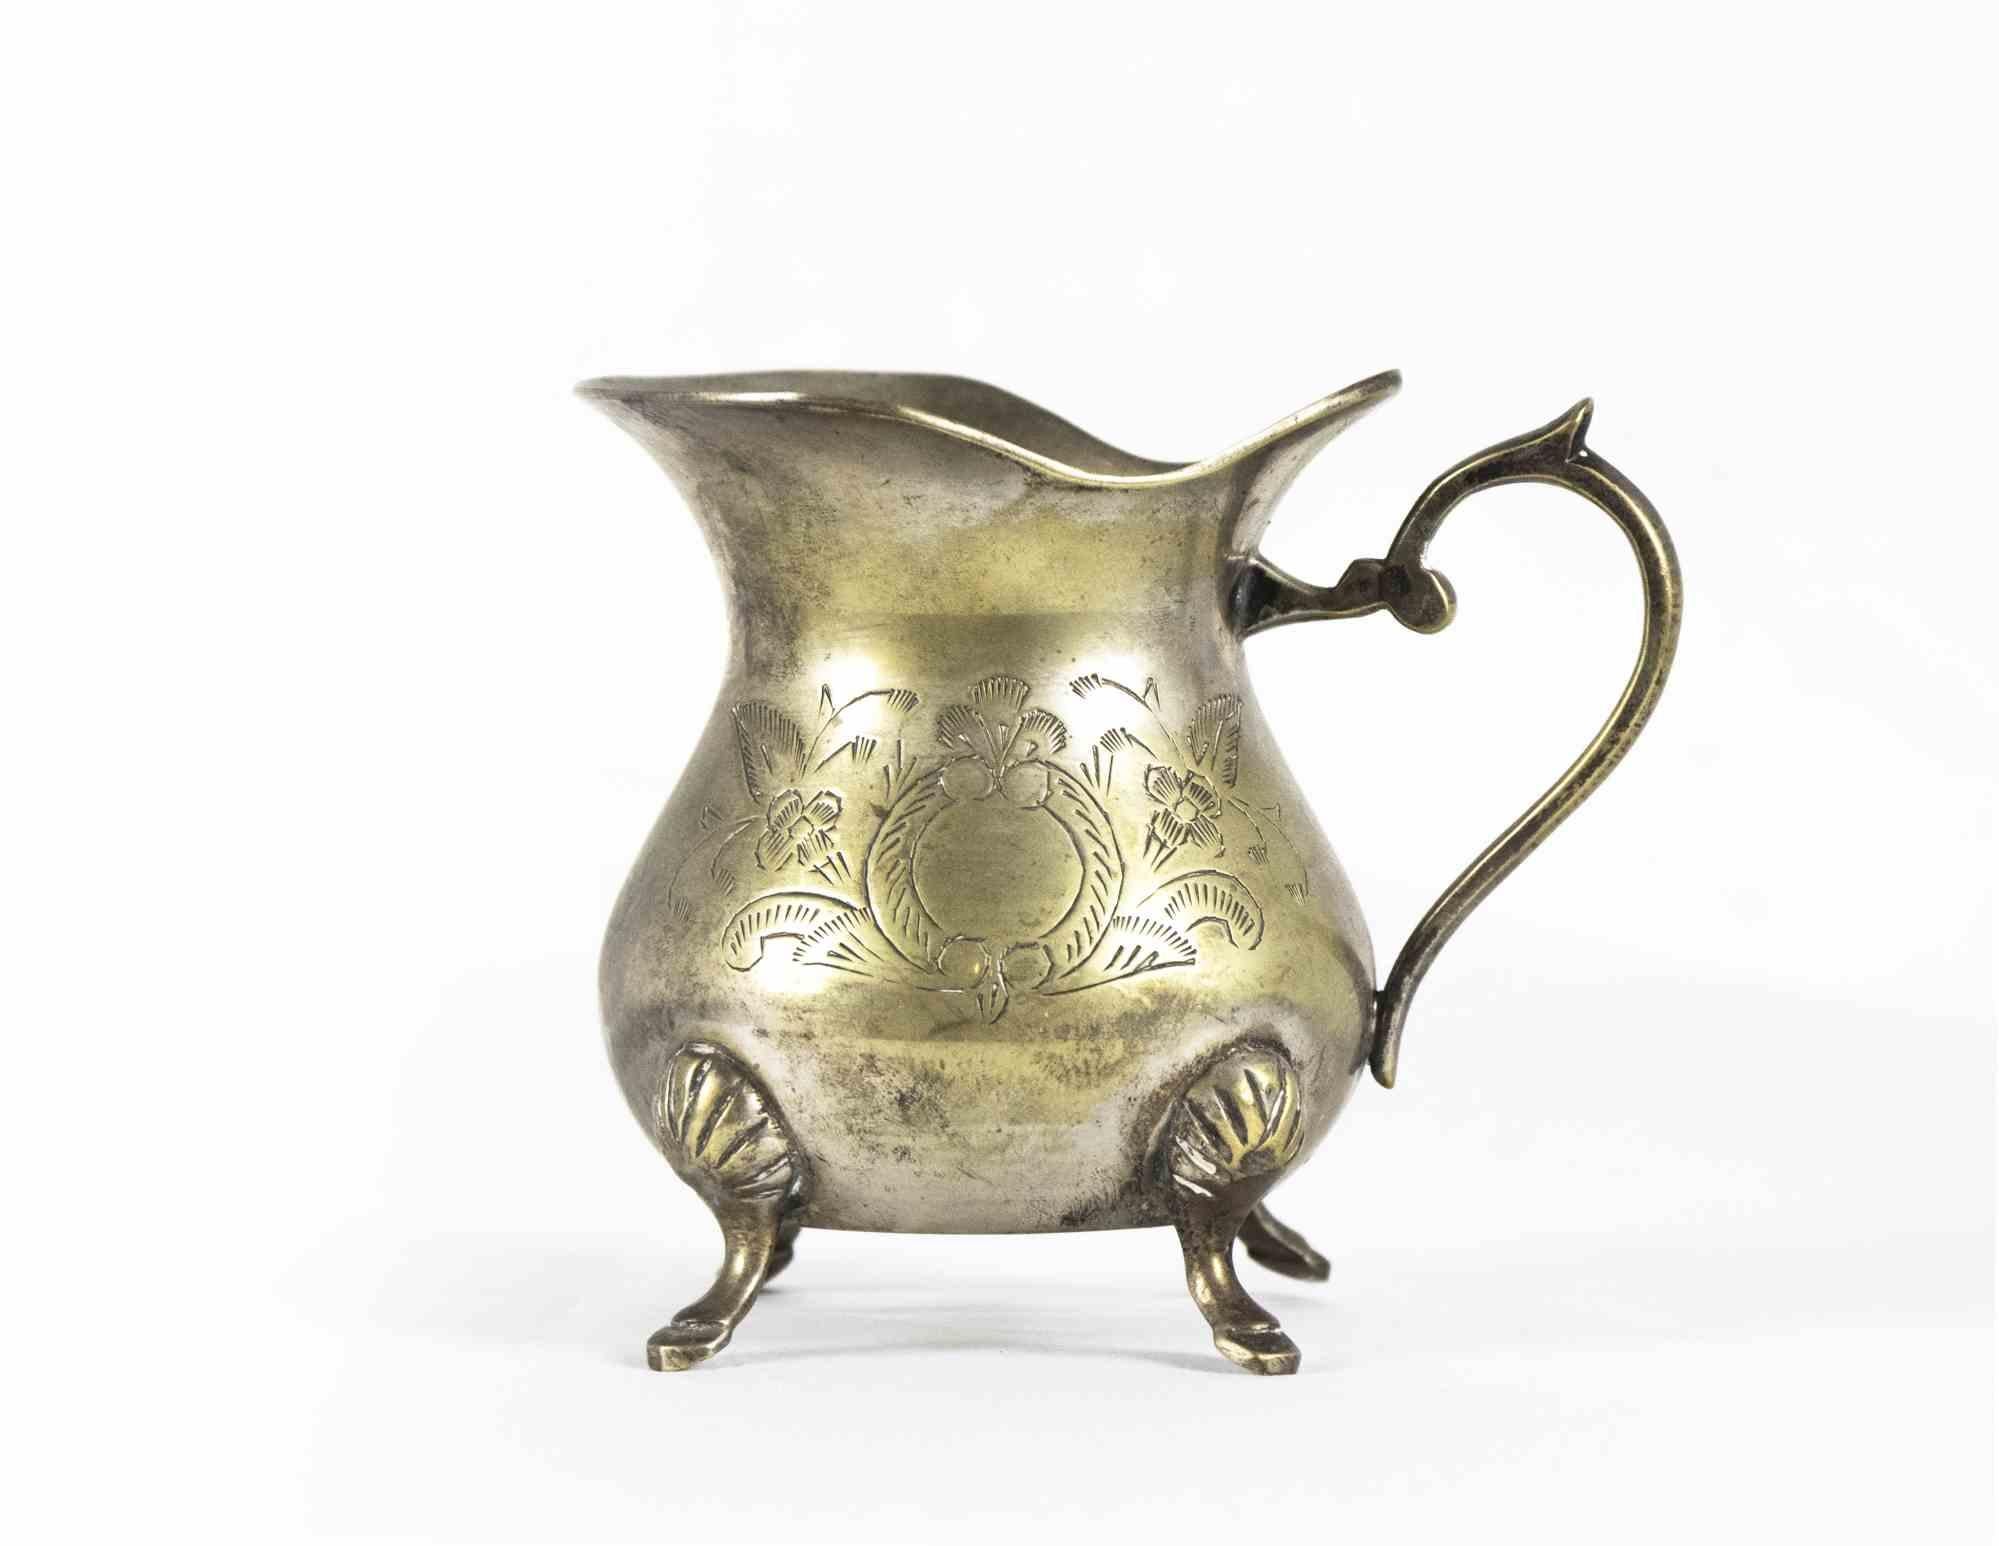 Brass tea set is an original decorative object realized in Europe in the early 20th century.

The set is realized in brass with chiseled decorations. 

The set includes: one tea pot, one coffee pot, a sugar bowl and a milk jug.

Various